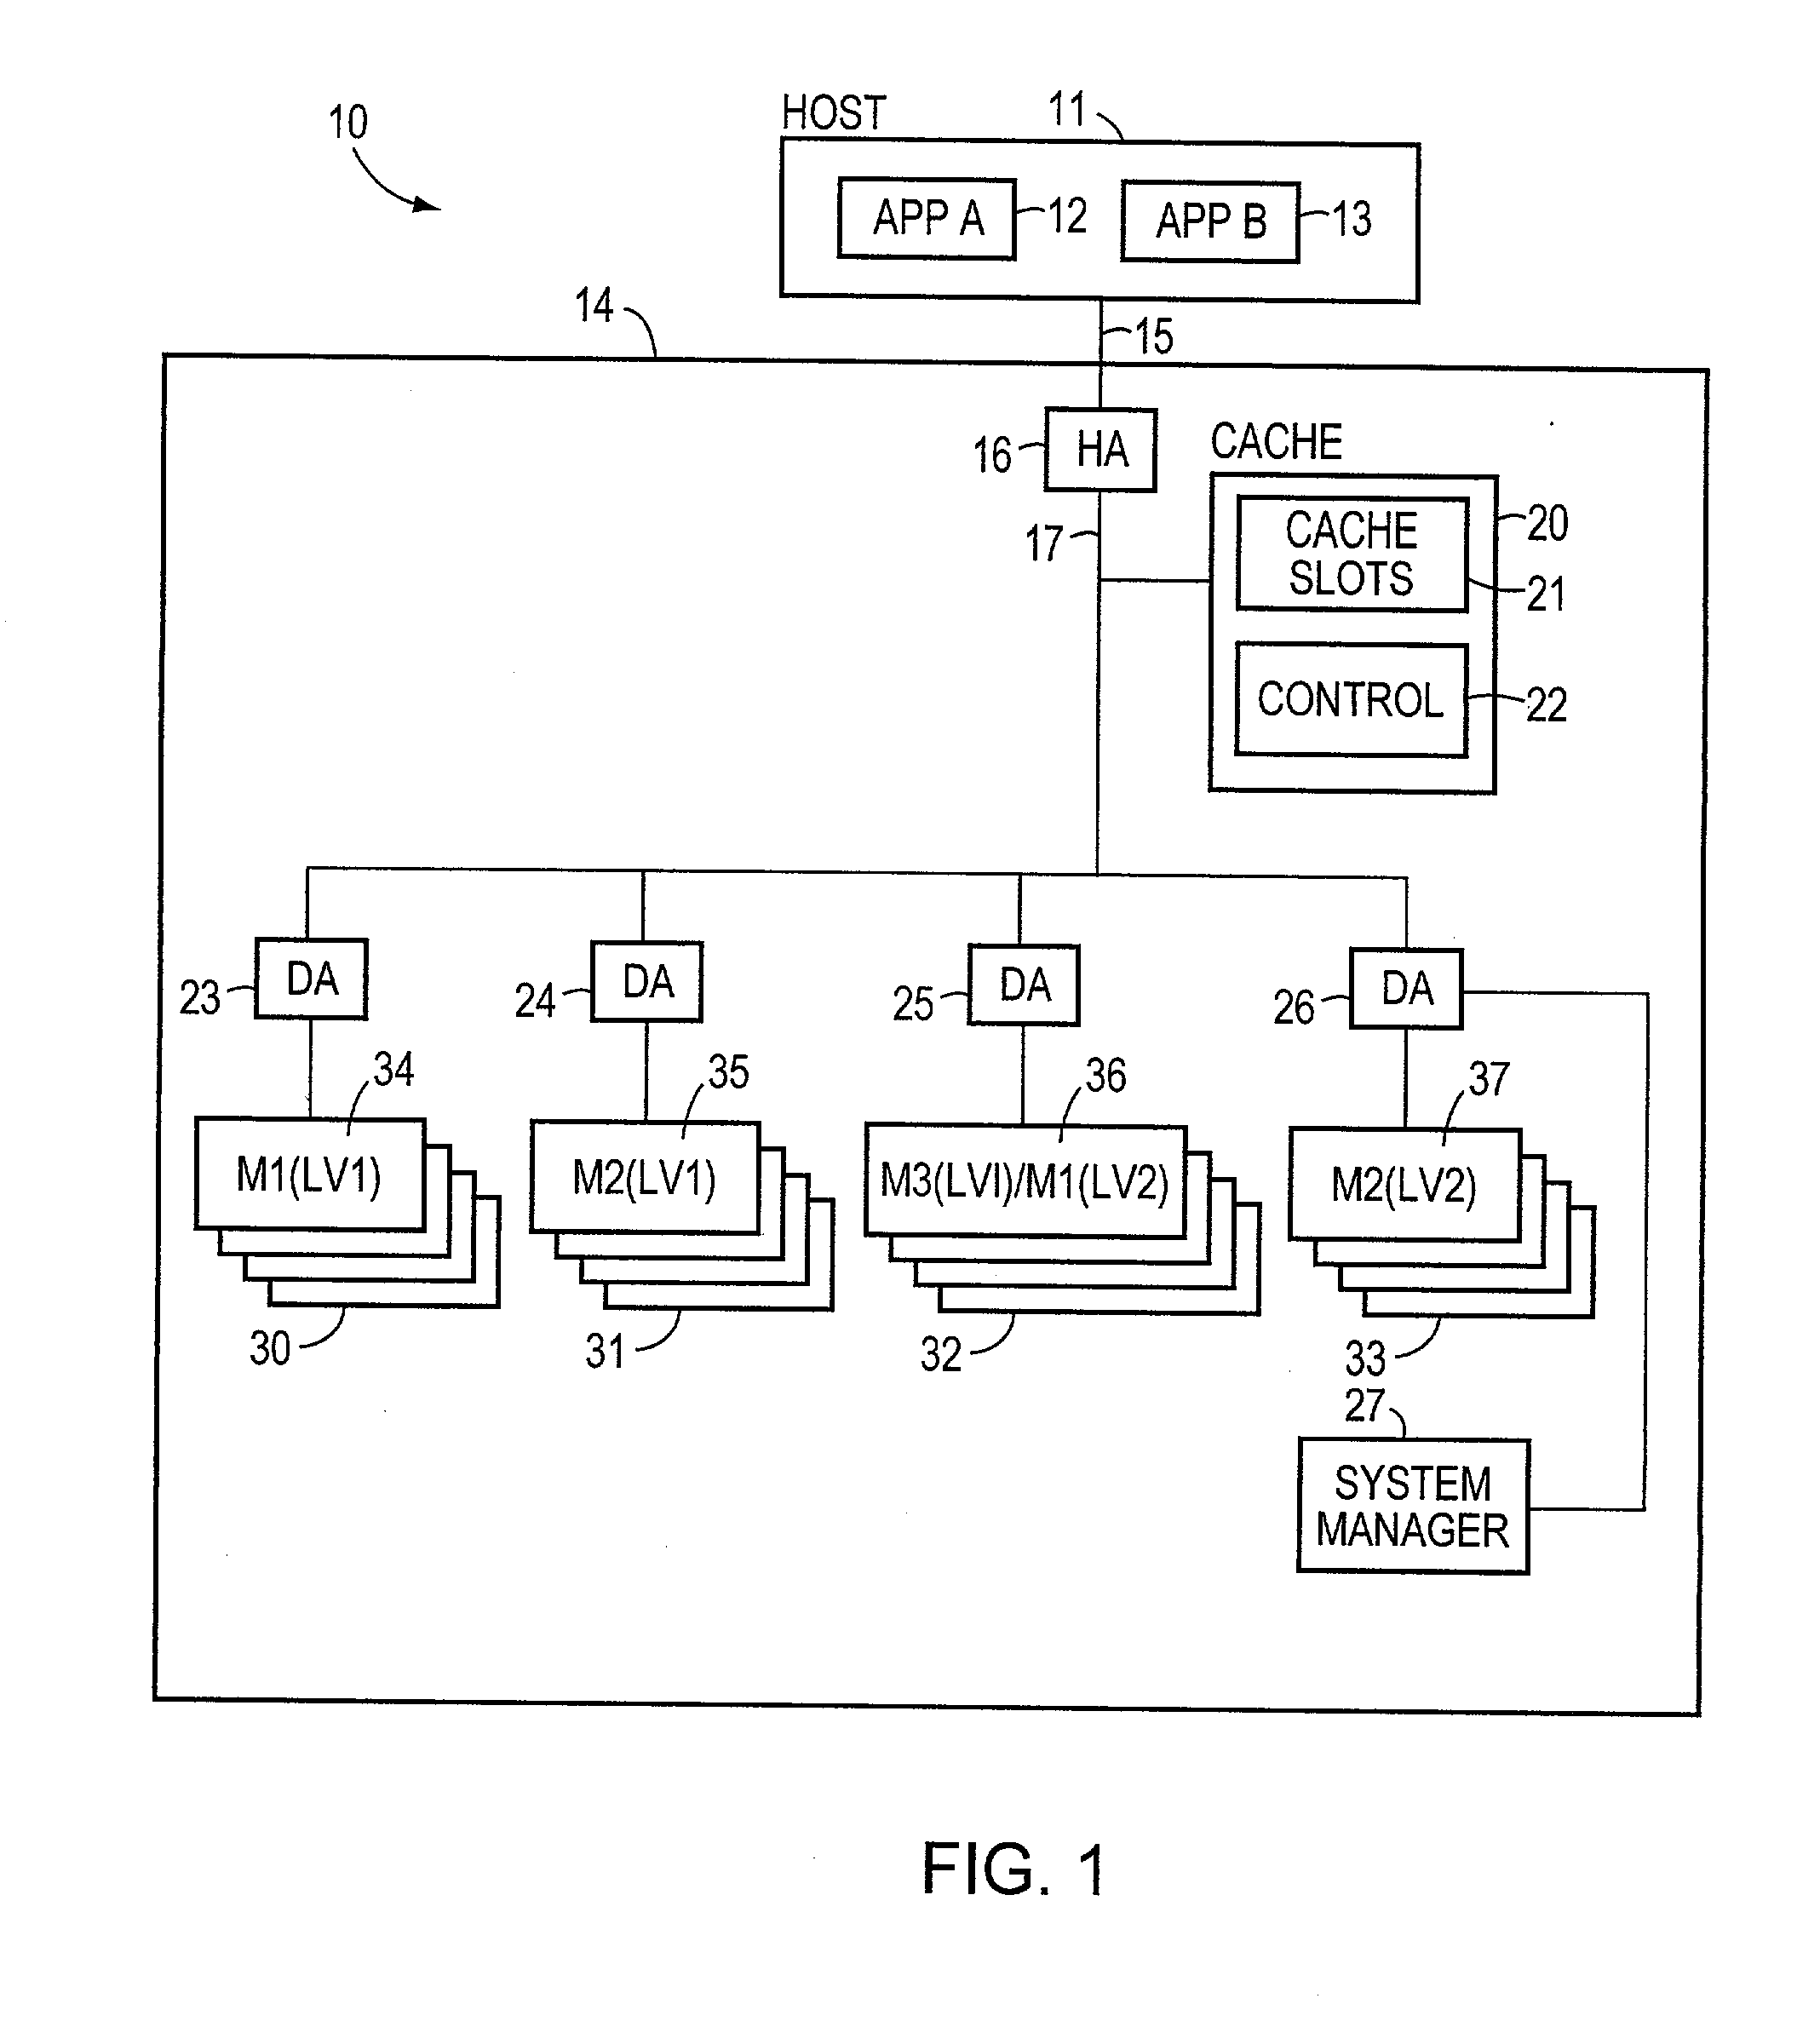 Method and apparatus for independent and simultaneous access to a common data set